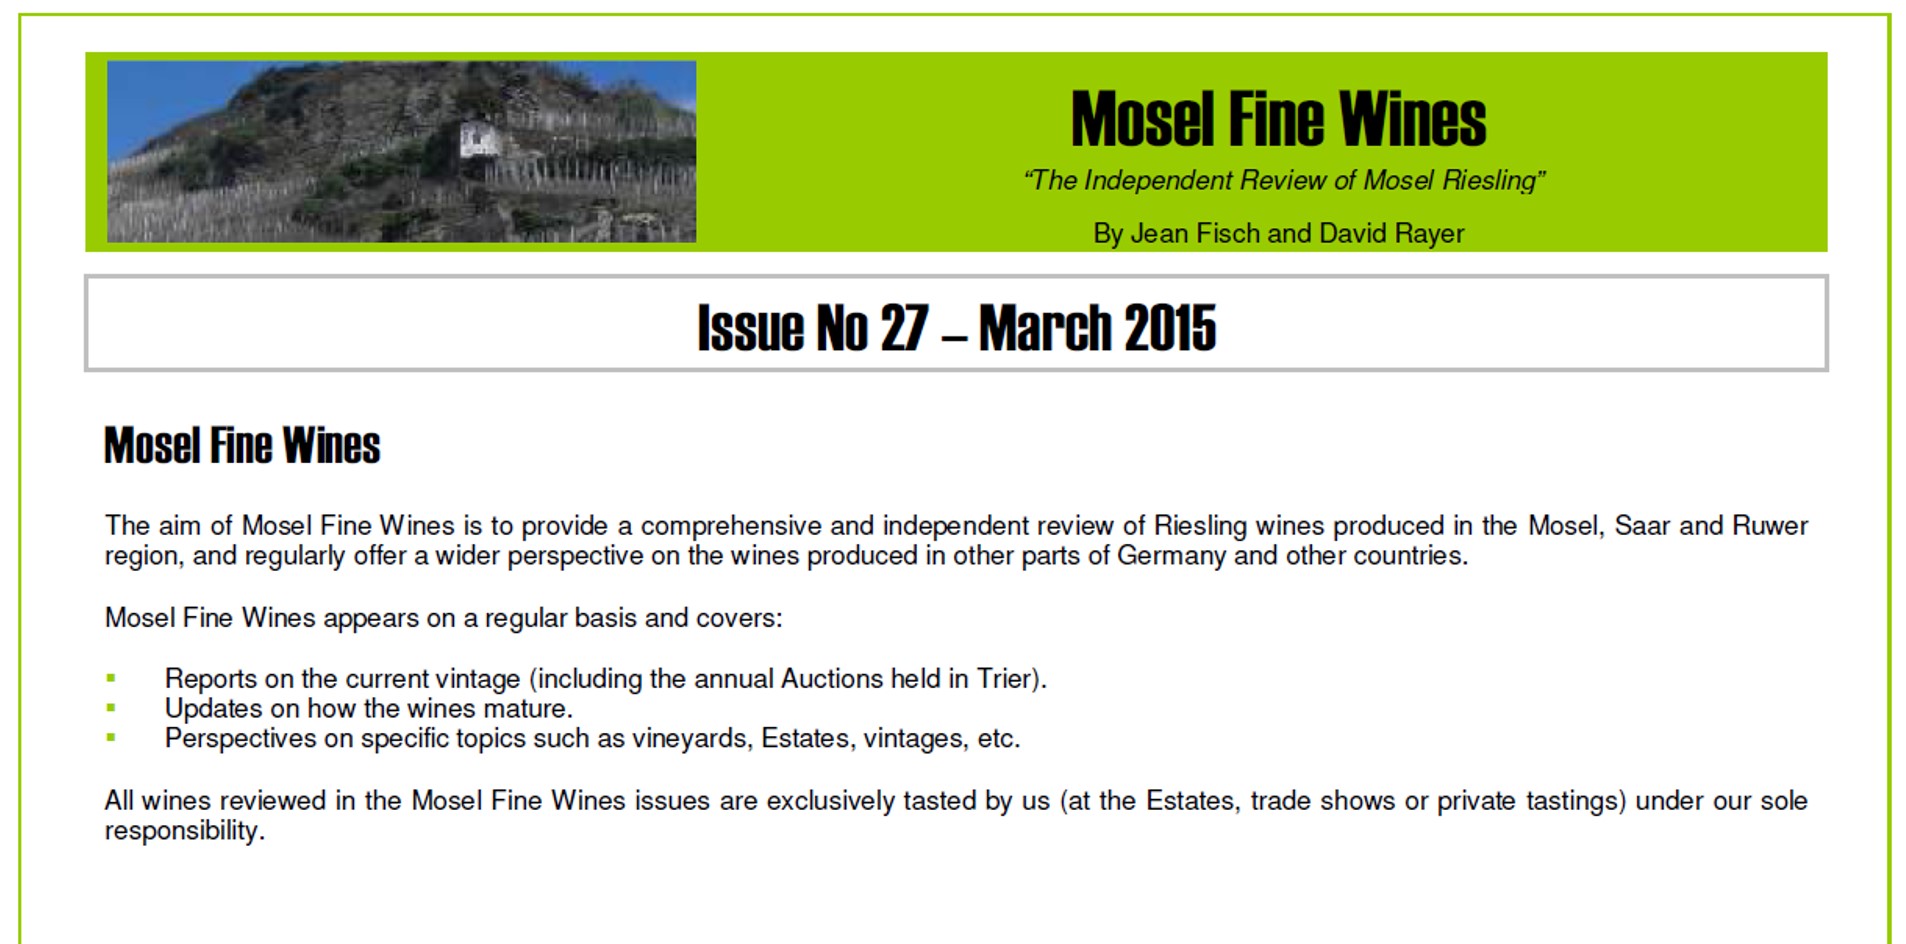 Mosel Fine Wines | Issue No 27 | March 2015